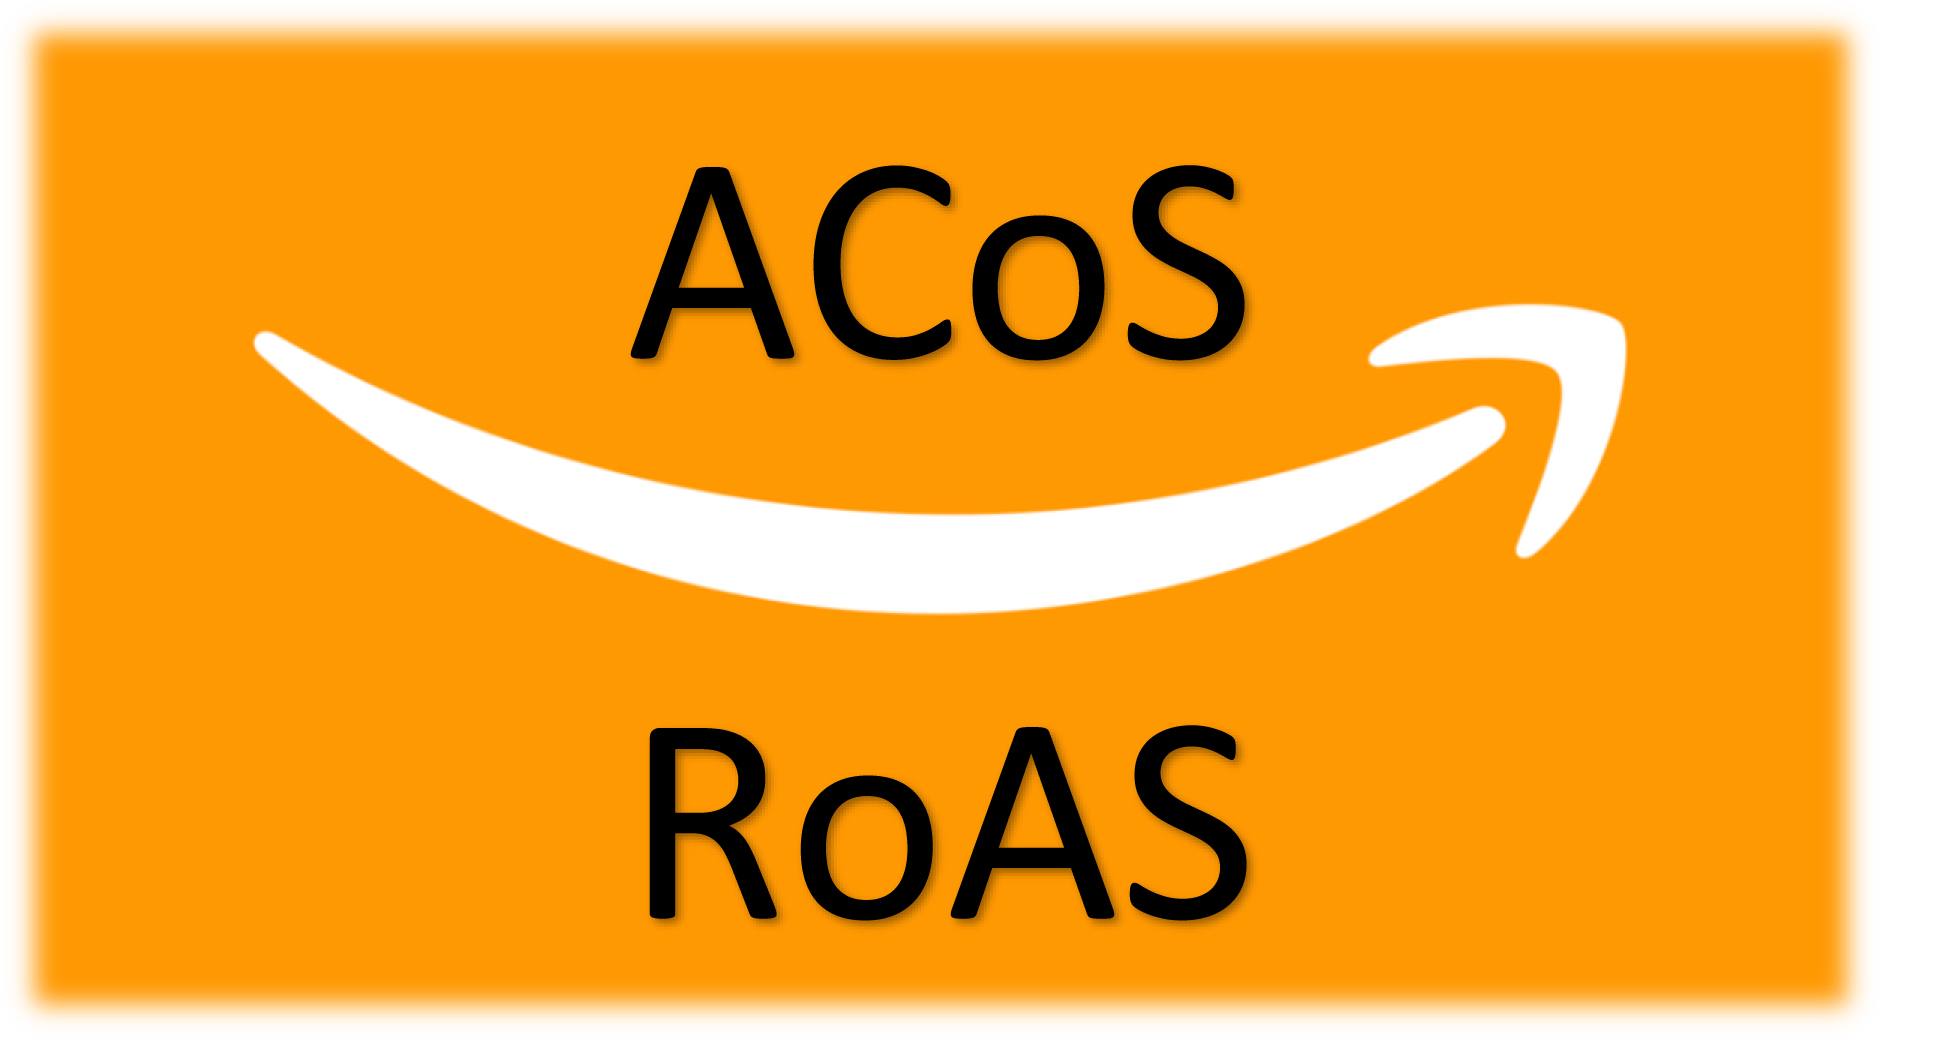 The RoAS and ACoS formula is inverted